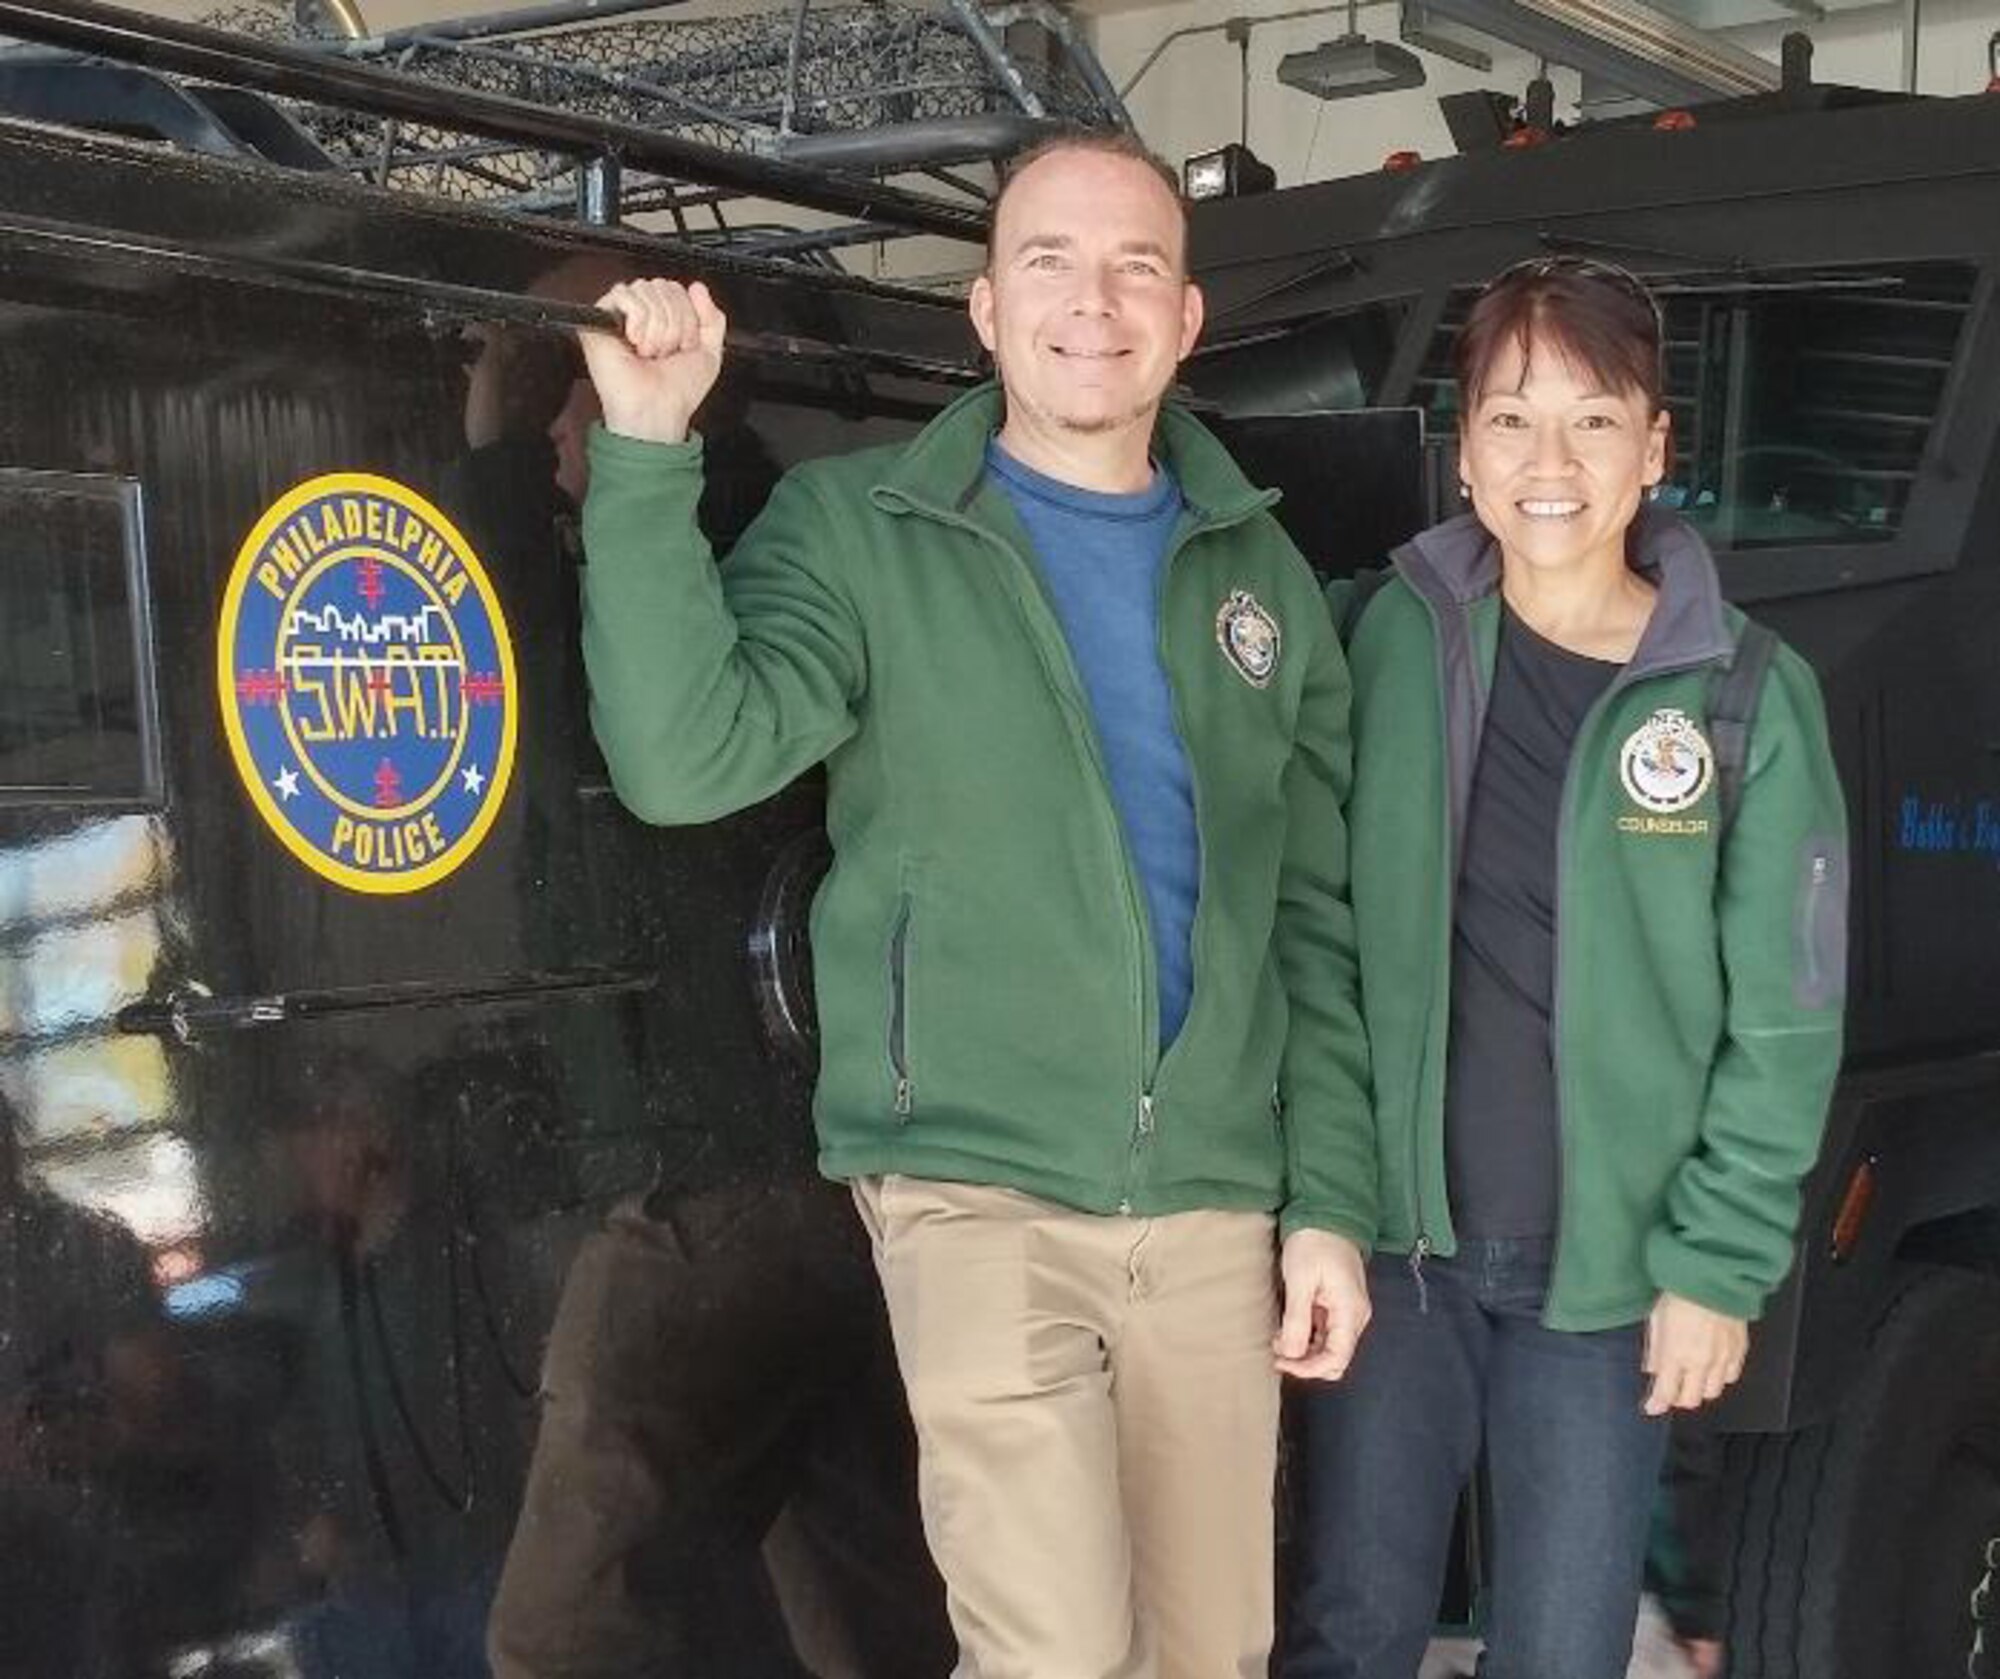 During the 10-week professional development program, Assistant Special Agent in Charge Paul Sternal and FBI Special Agent (counselor) Inez Miyamoto visited the Philadelphia SWAT squad.
